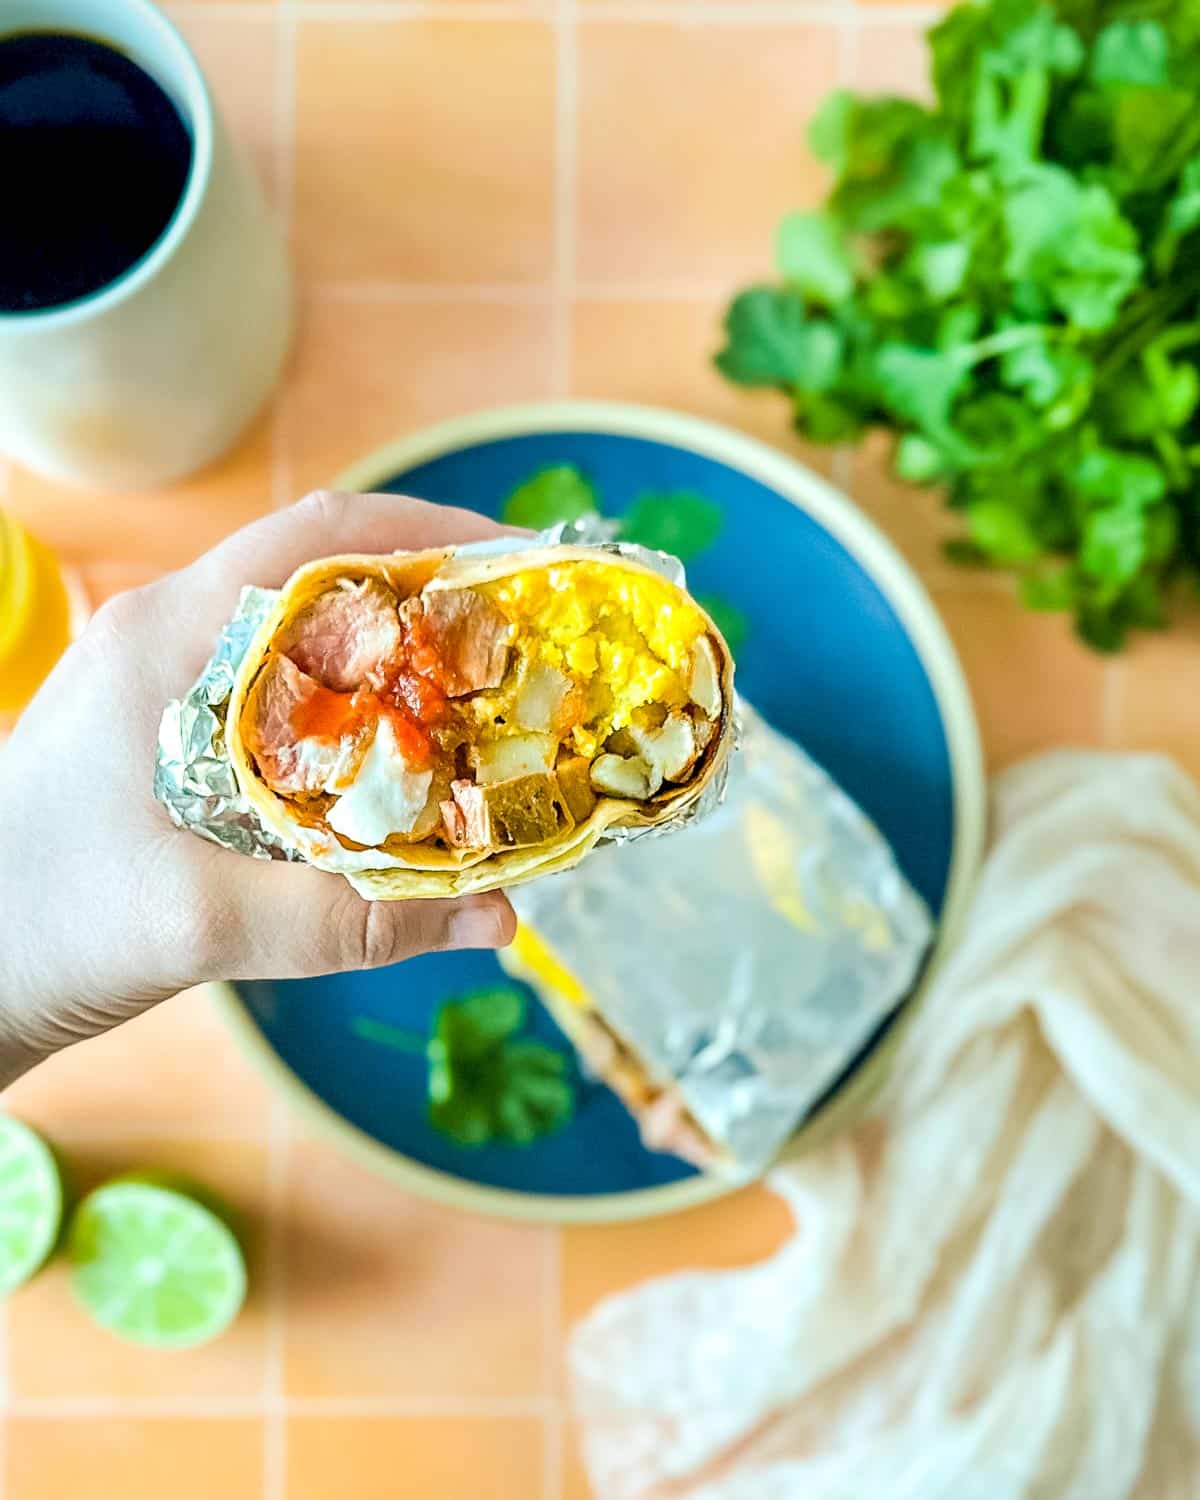 Half of a carne asada breakfast burrito is held over a blue plate that's surrounded by limes, coffee, and orange juice.